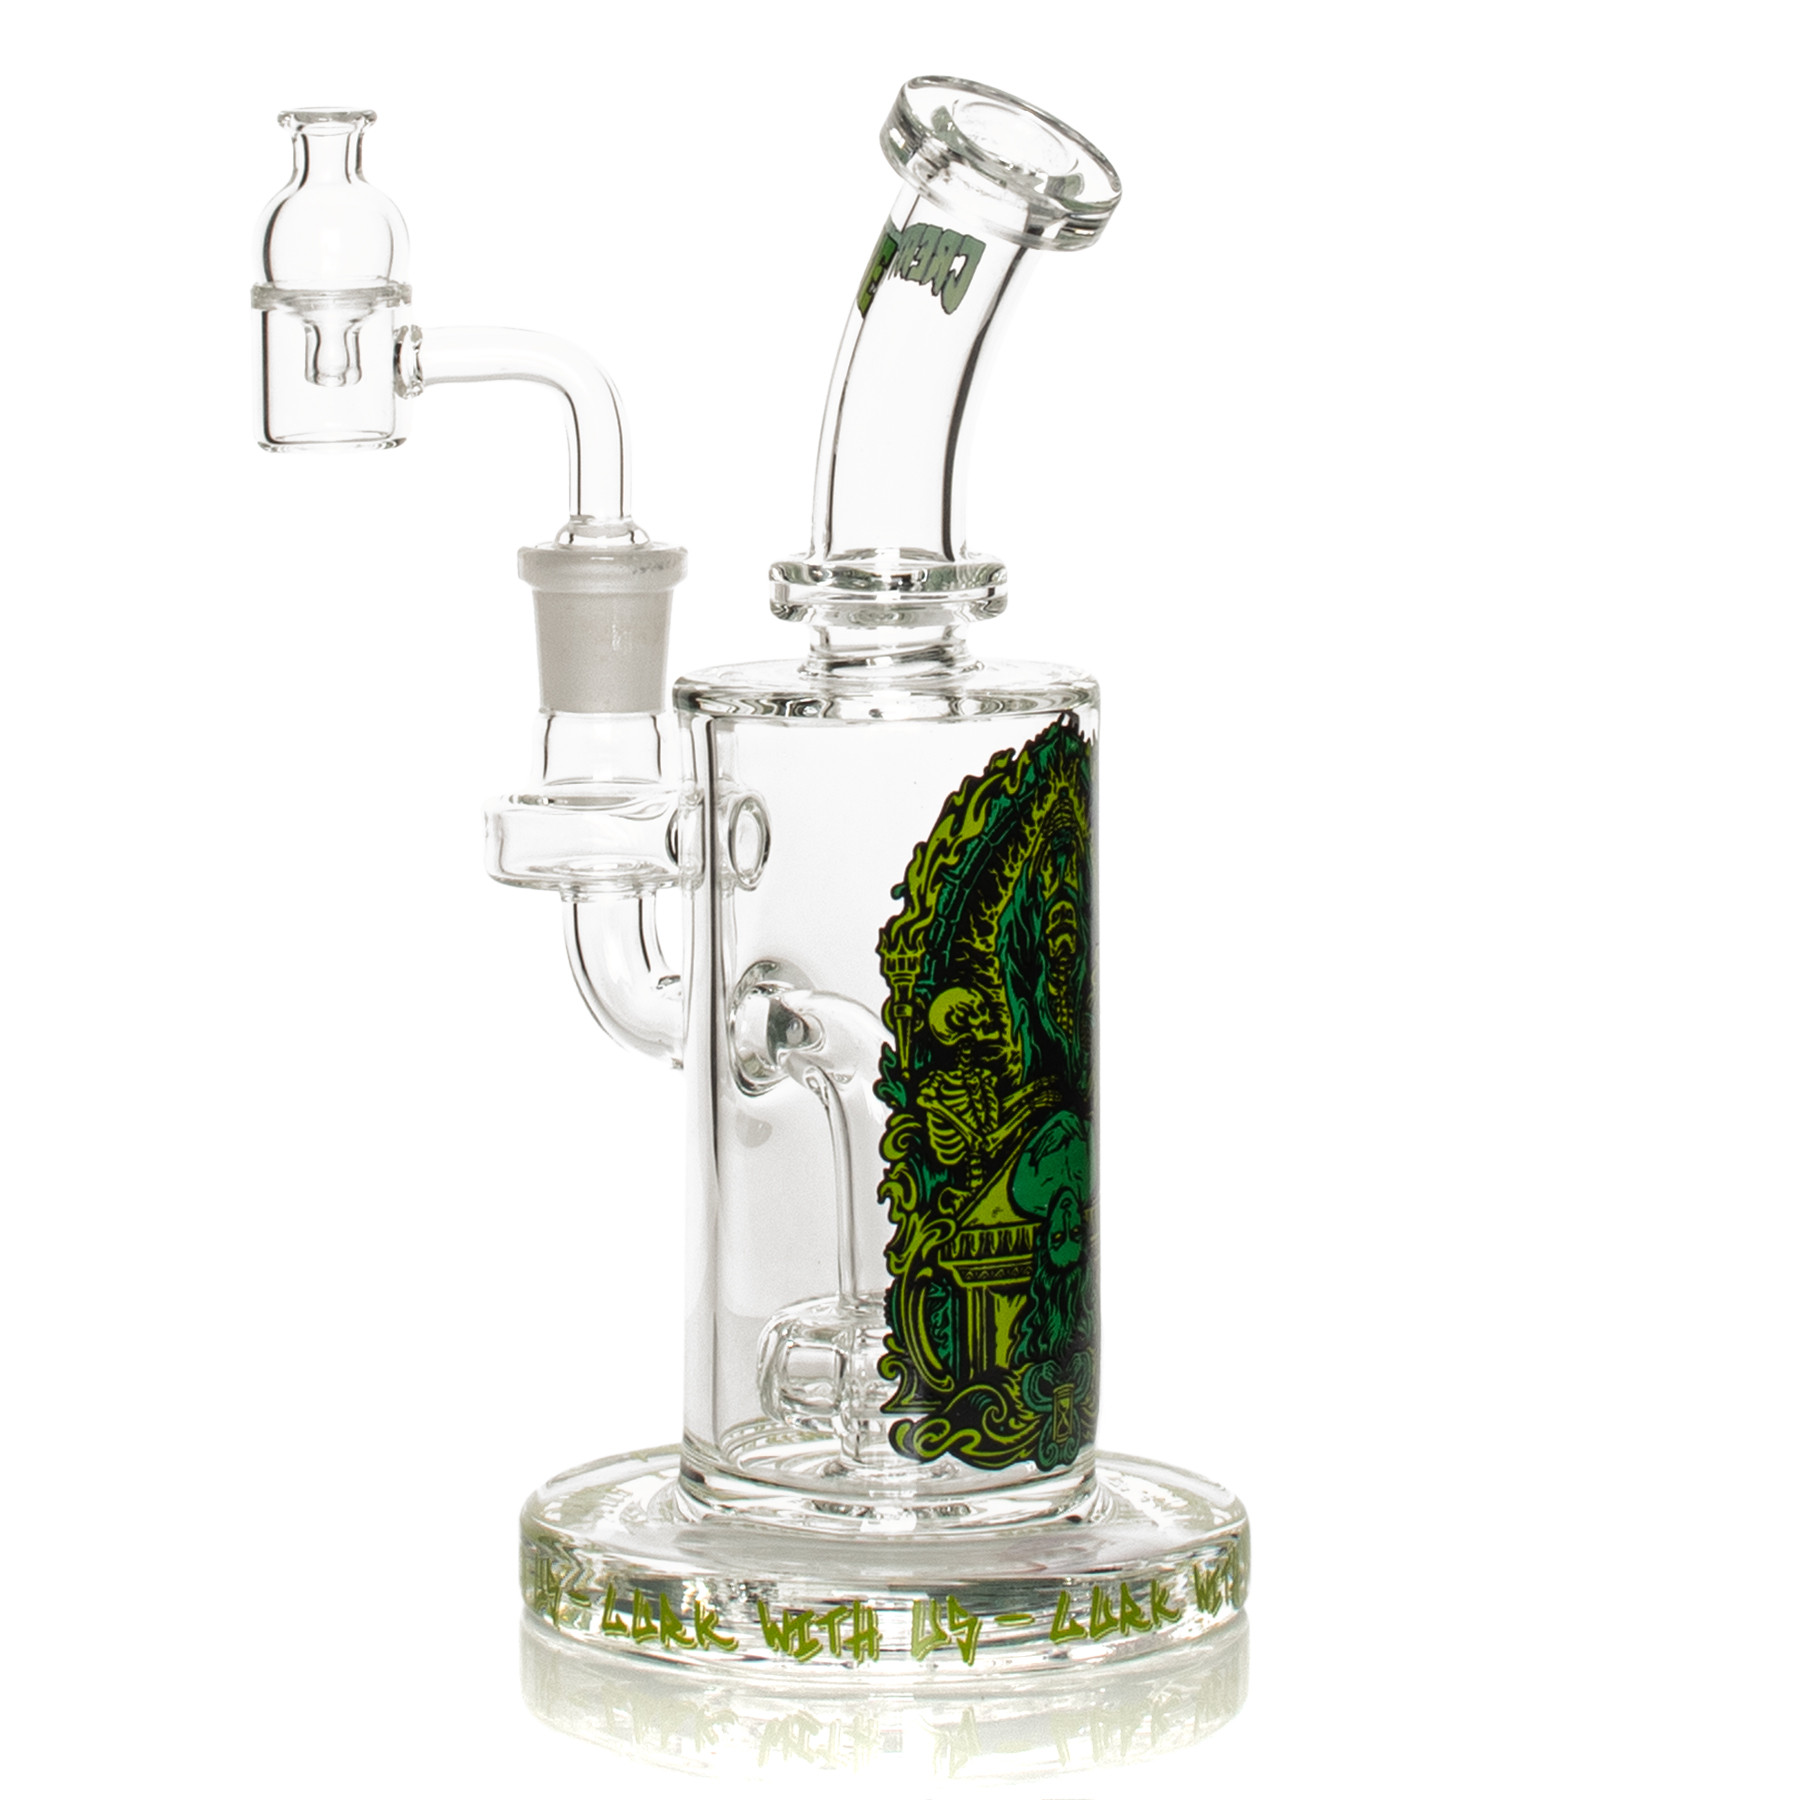 7.5" Sacrifice Concentrate Rig